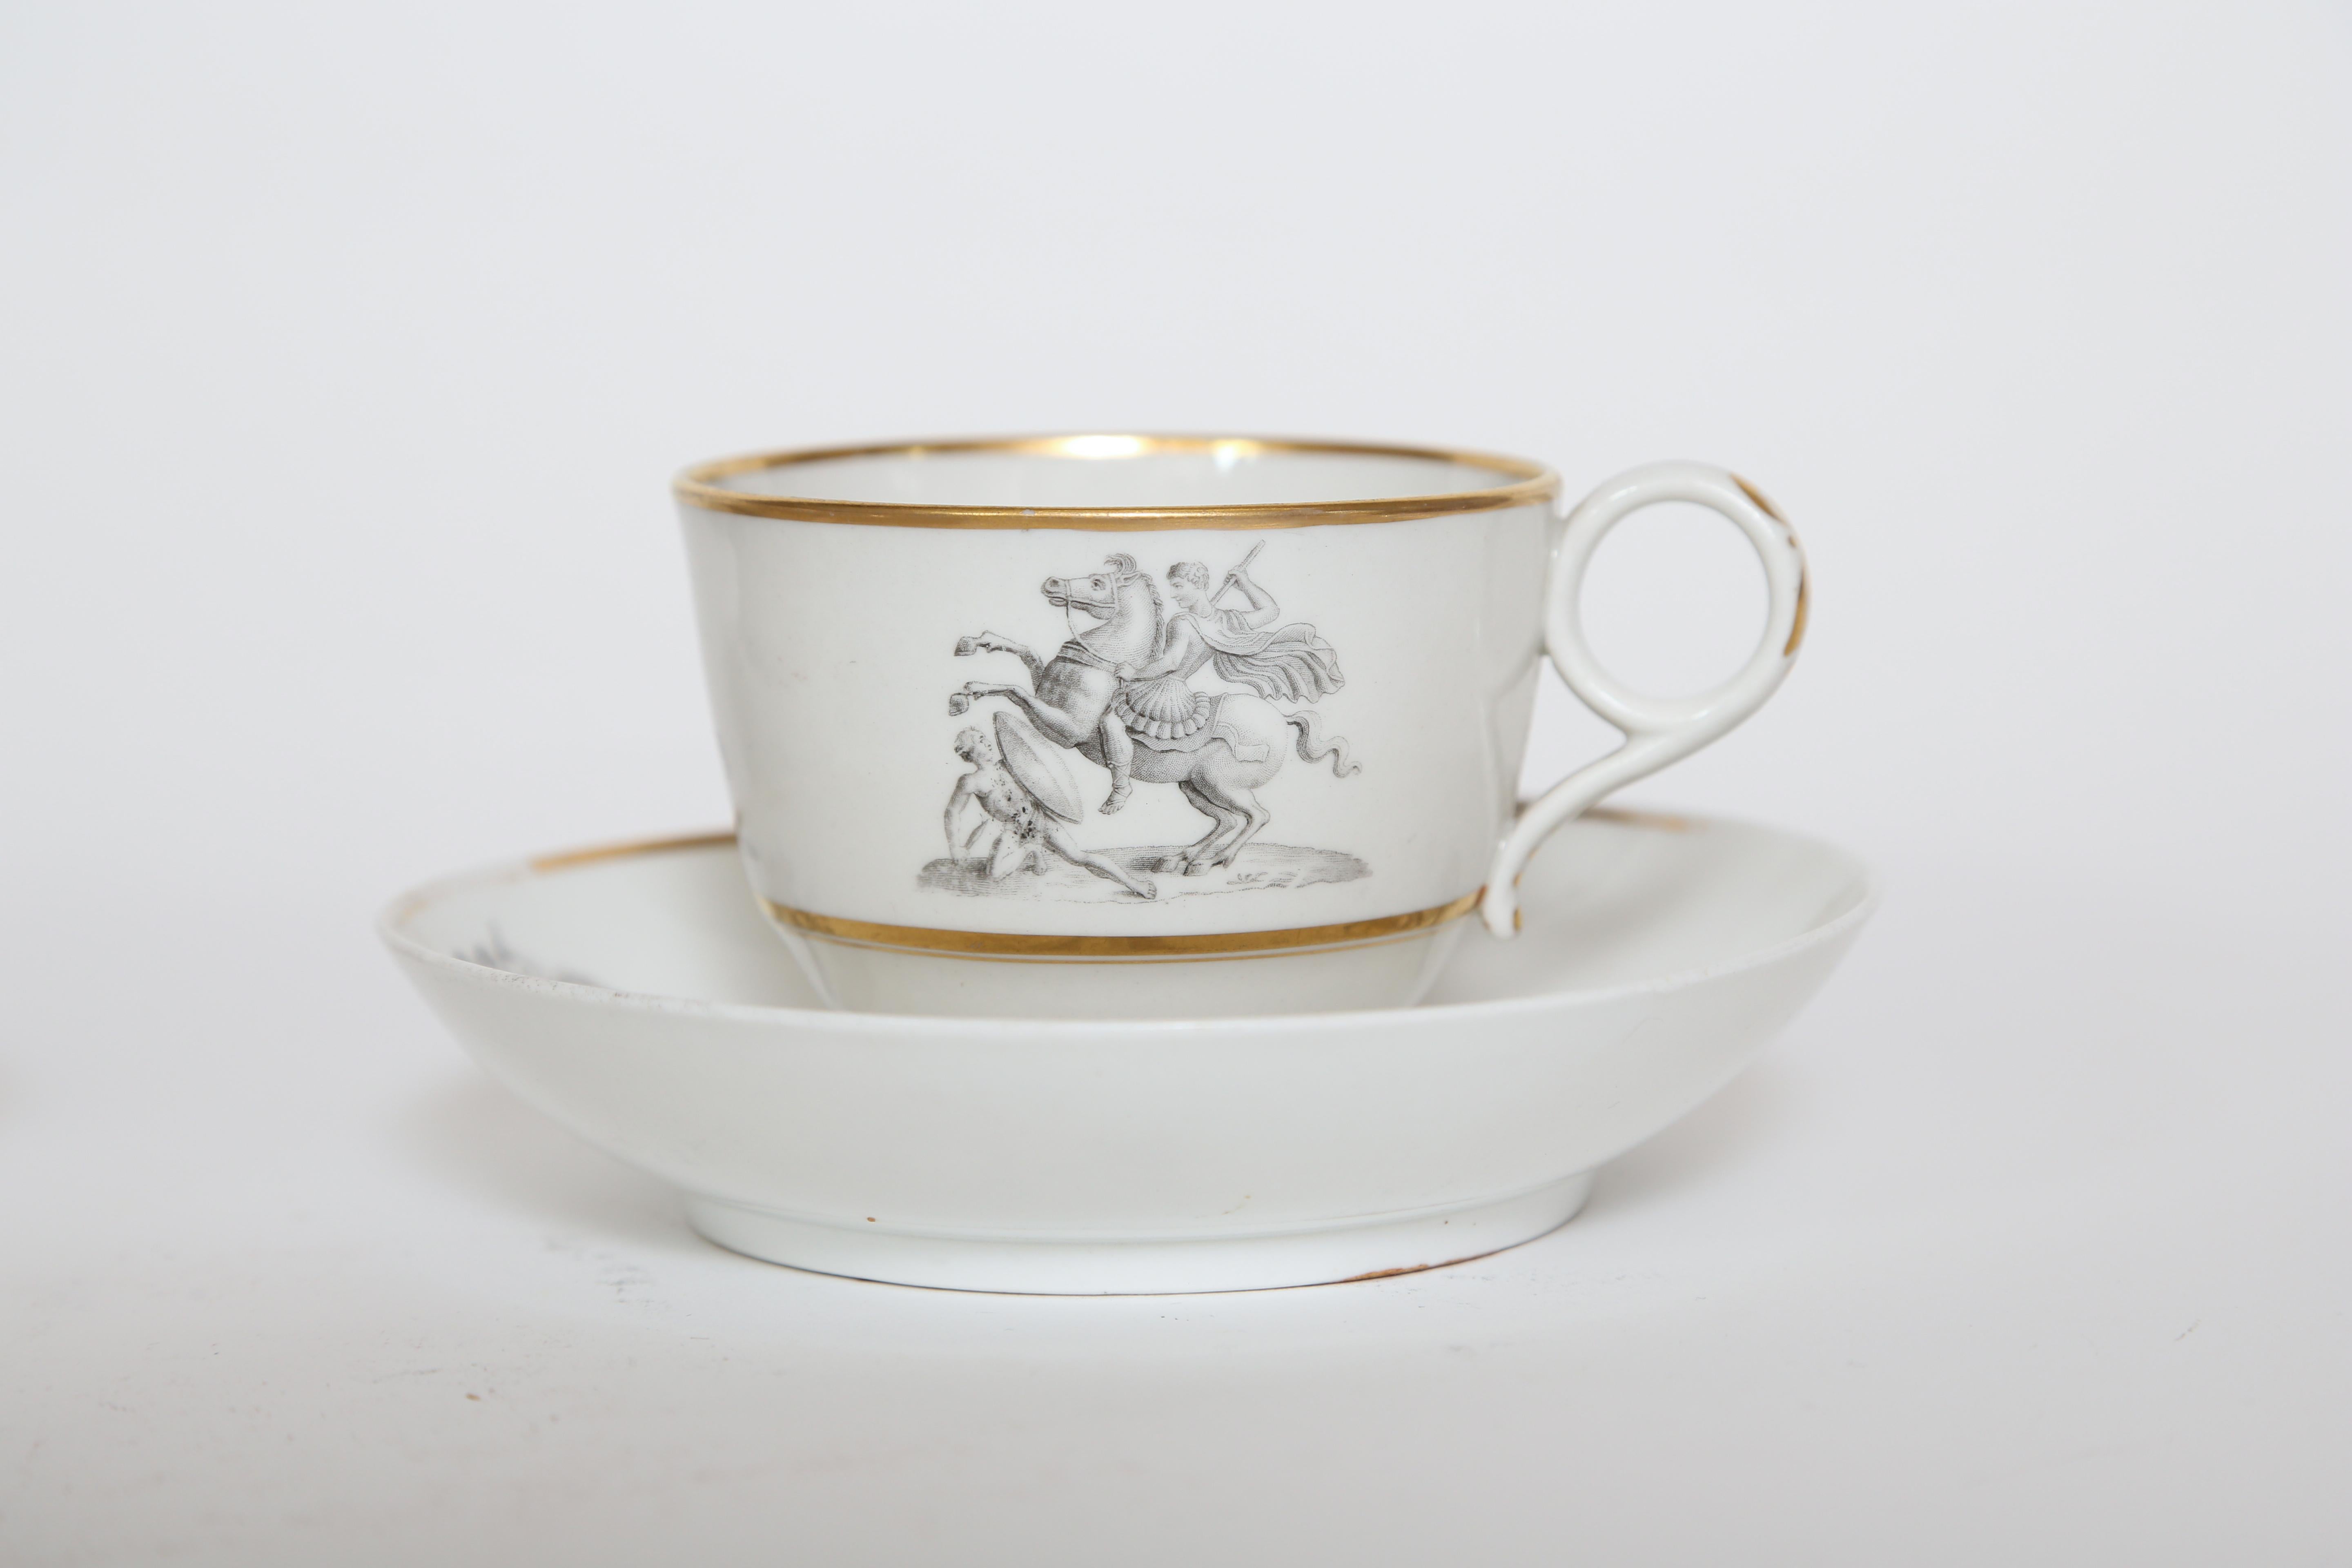 Set of six early 19th century flight, Barr & Barr cups and saucers. They are transfer printed in black with gilt edging. Applied finger ring with gold decoration. Marked on the underside BFB with a crown above. There is some wear to the gold and